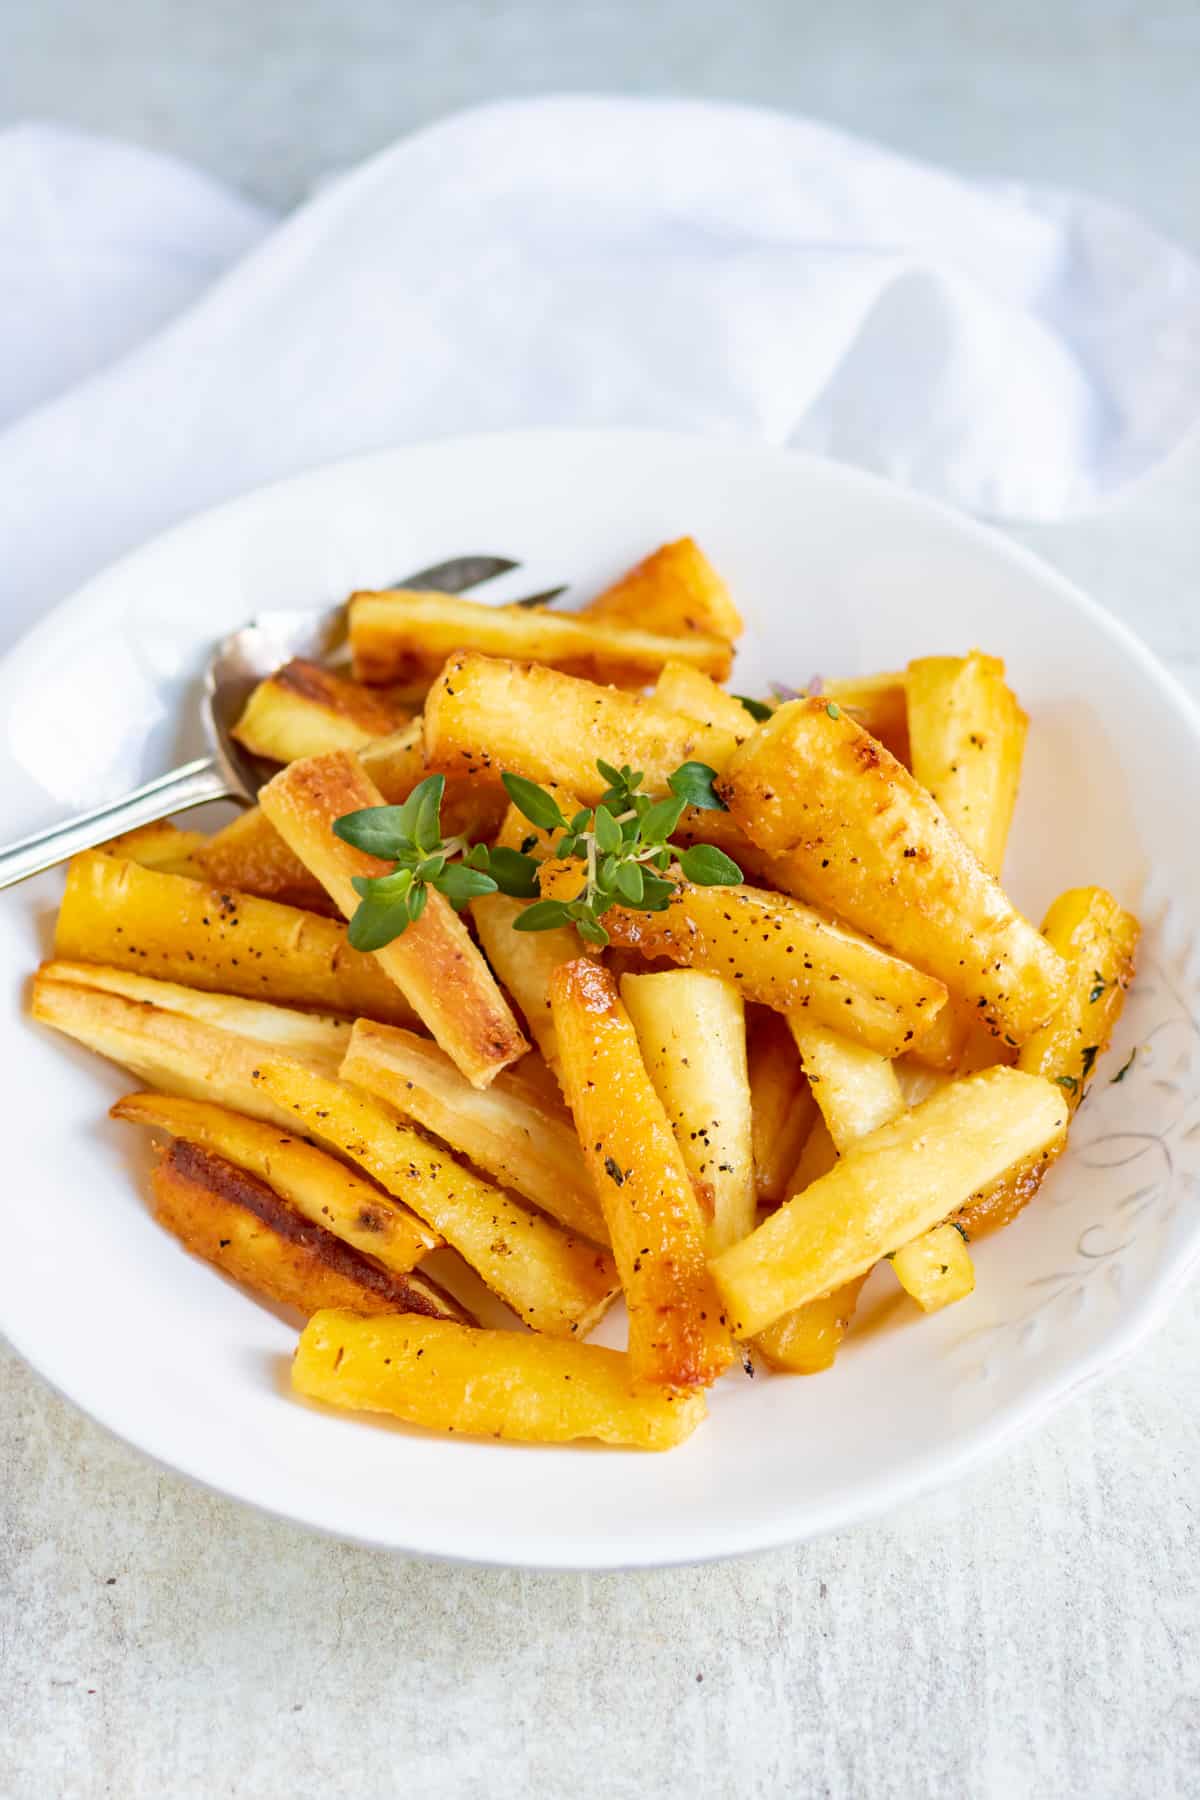 A dish of honey roasted parsnips.